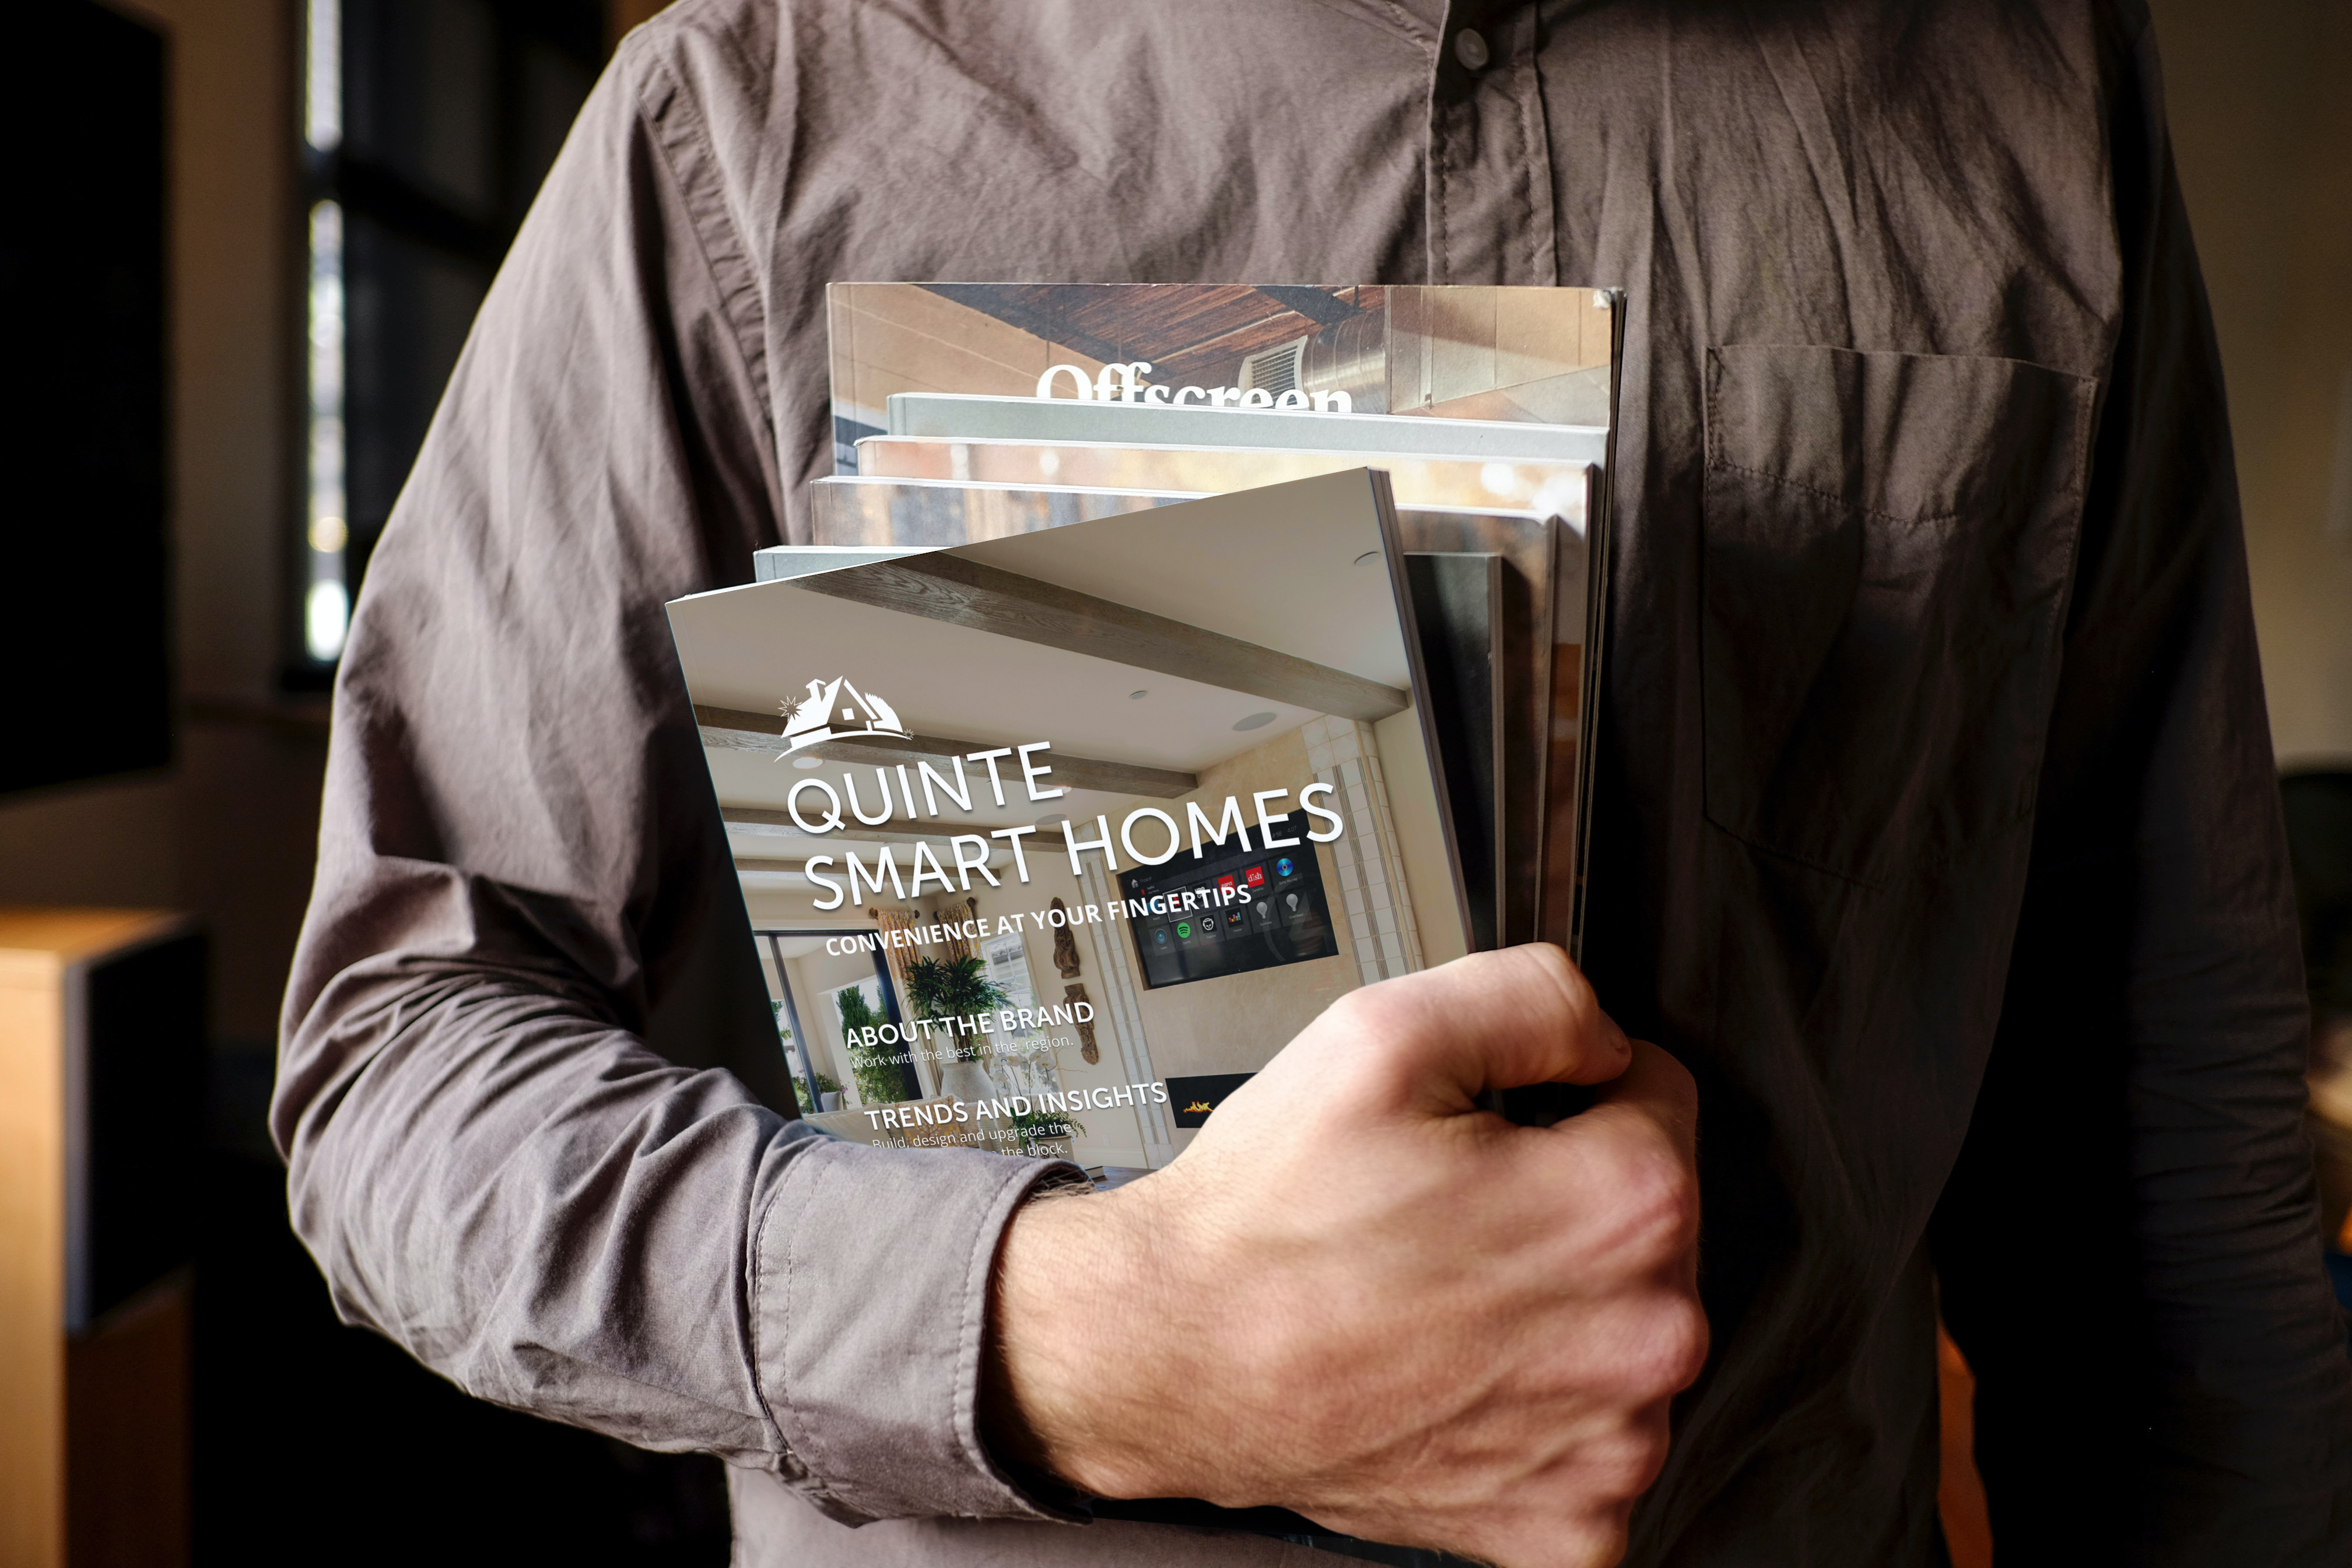 Portrait magazine cover in the hand of a man_Quinte Smart Homes New Client Booklet_DRAFT 3